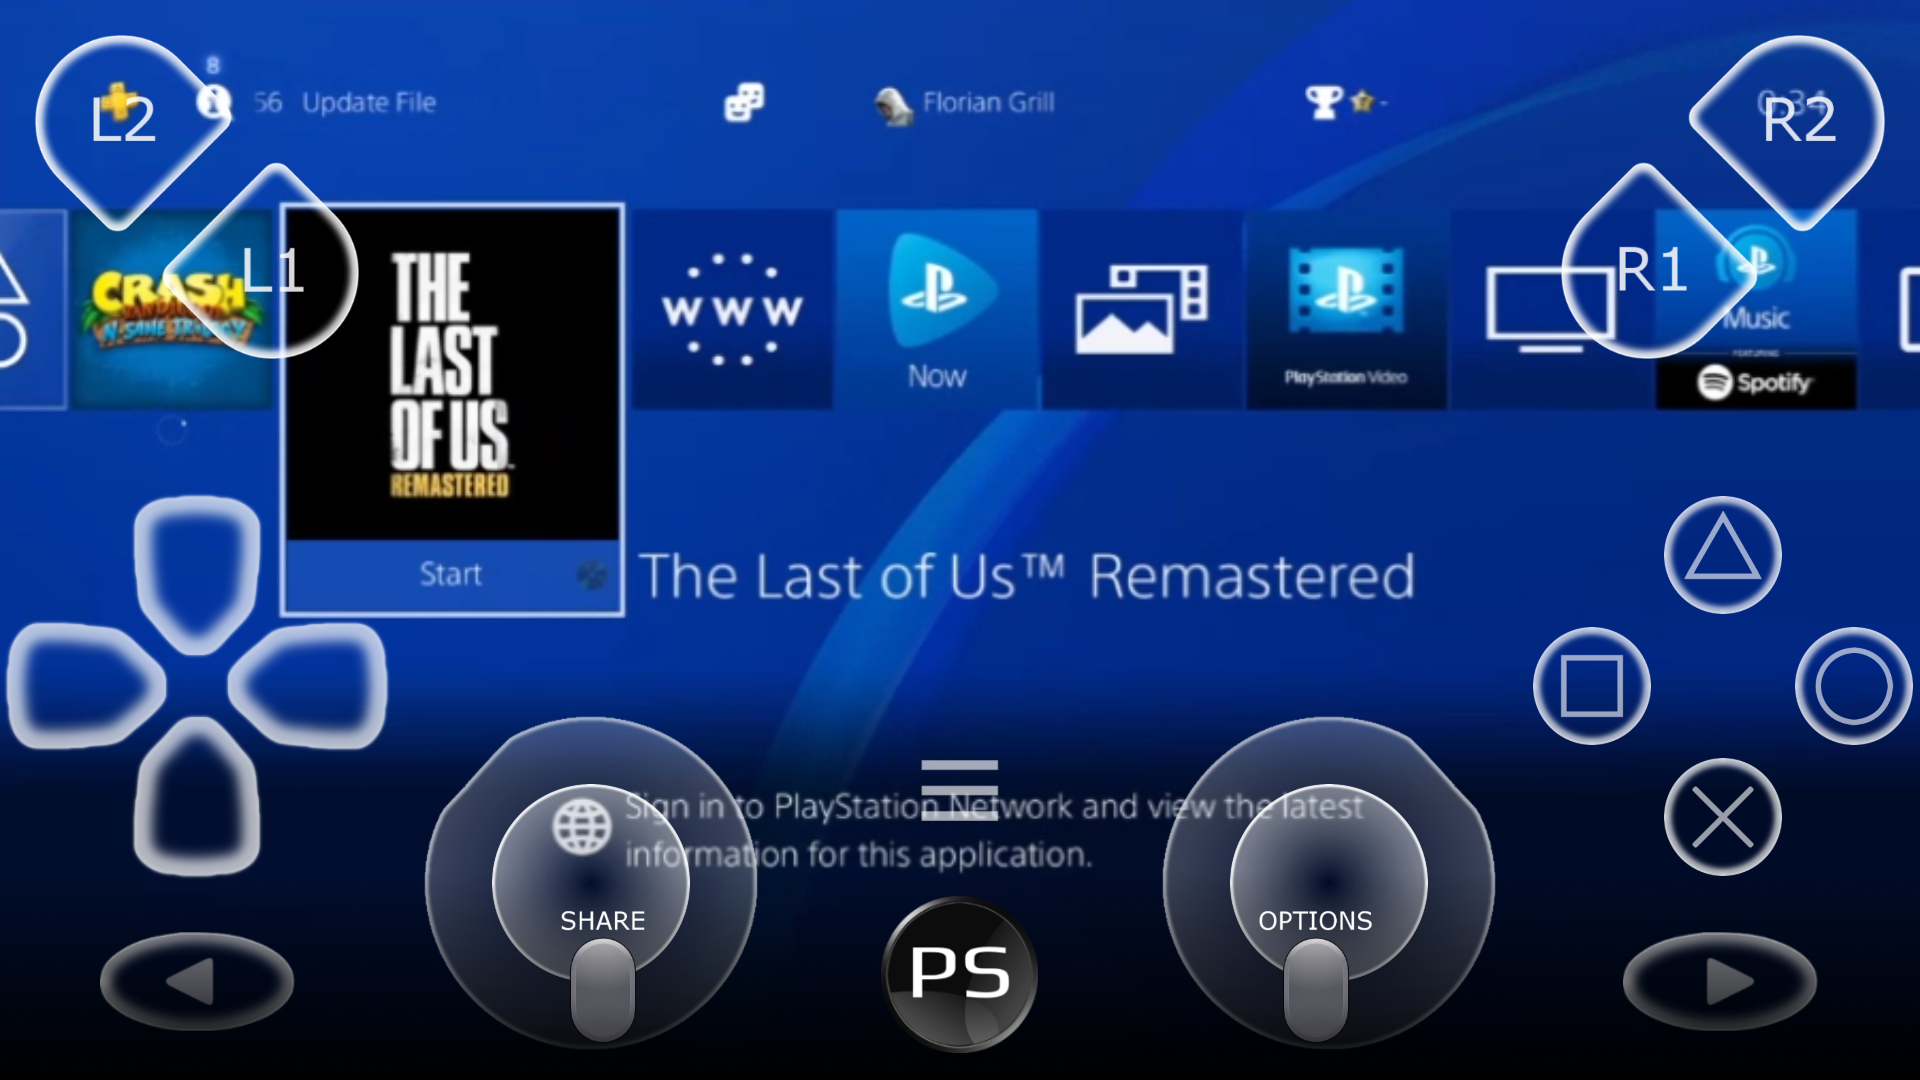 PSJoy: Extended PC Remote Play for PS4 APK 1.0.6 for Android – Download  PSJoy: Extended PC Remote Play for PS4 APK Latest Version from APKFab.com